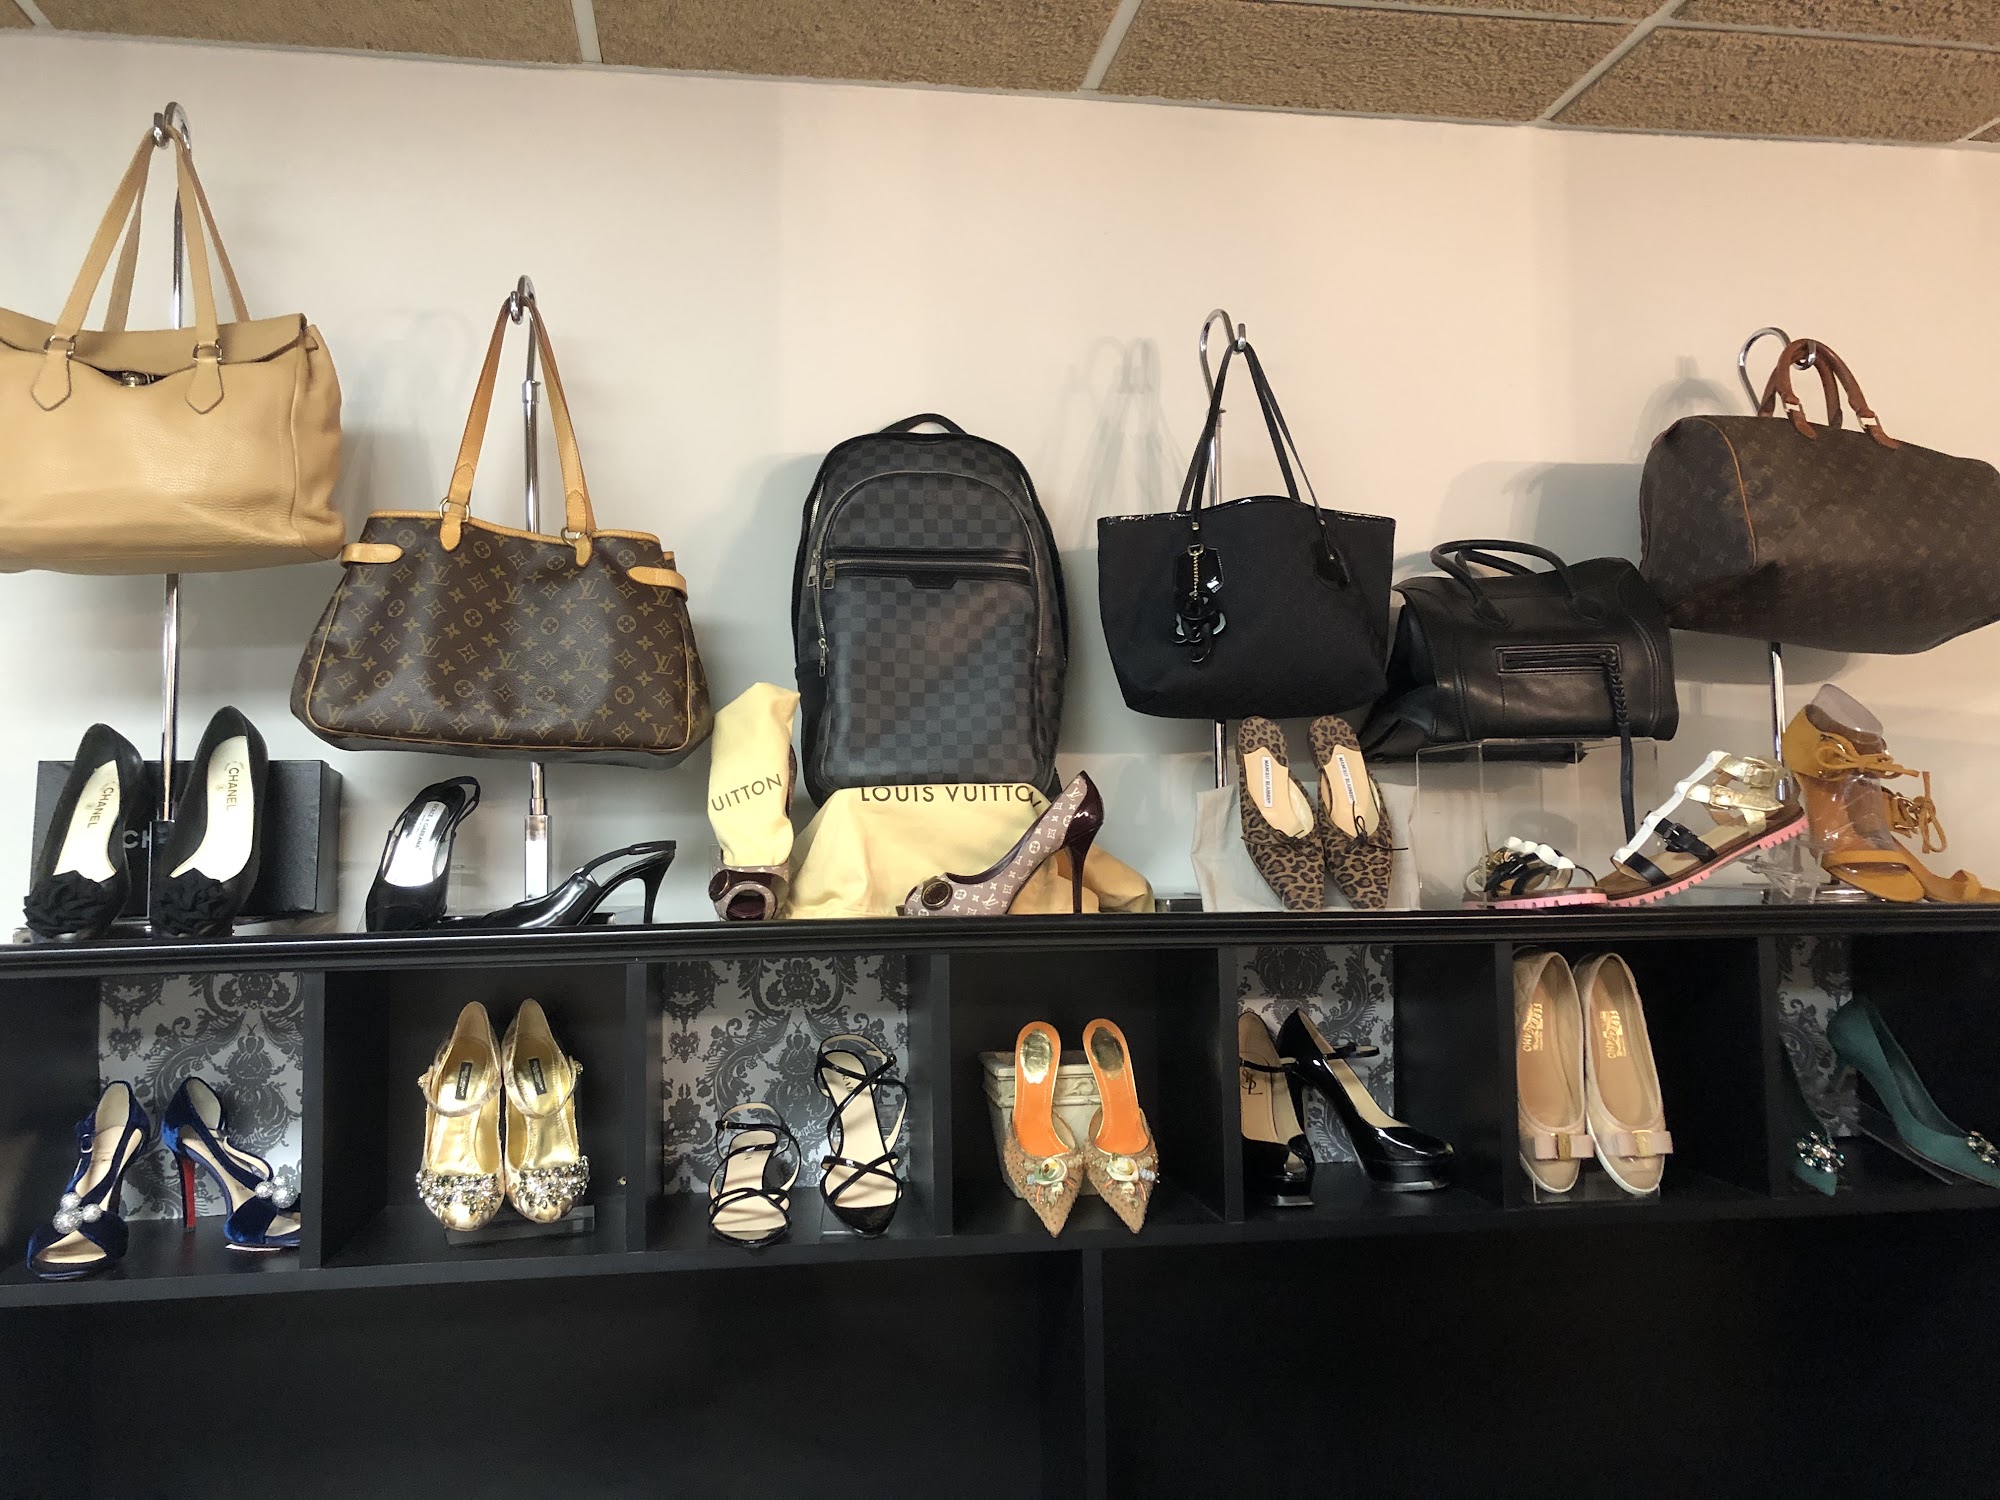 B. Savvy Consignment & Accessory Boutique